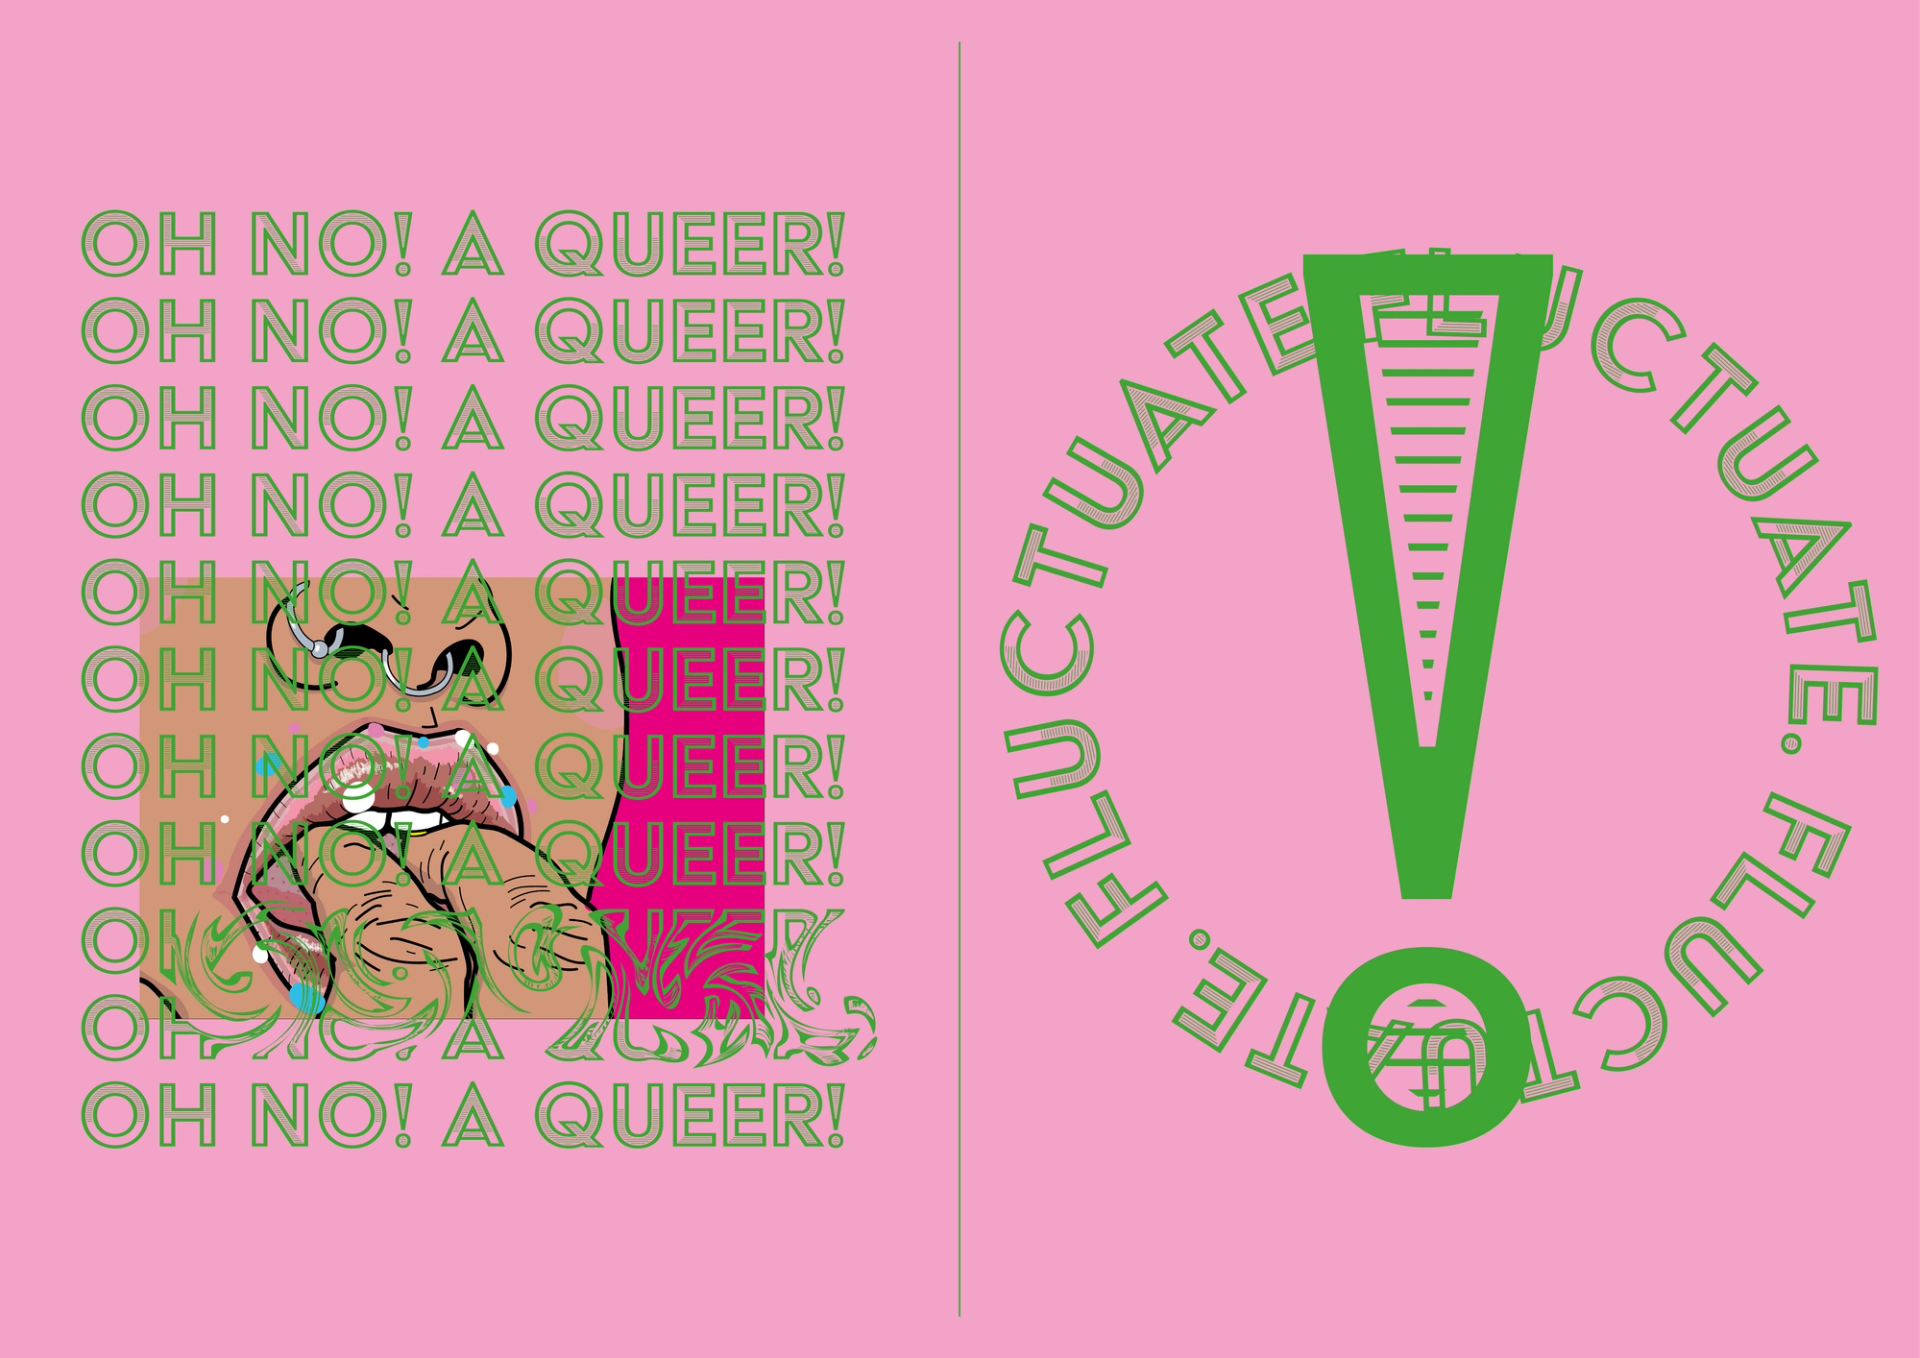 OH NO A QUEER! - FMP FLUCTUATE